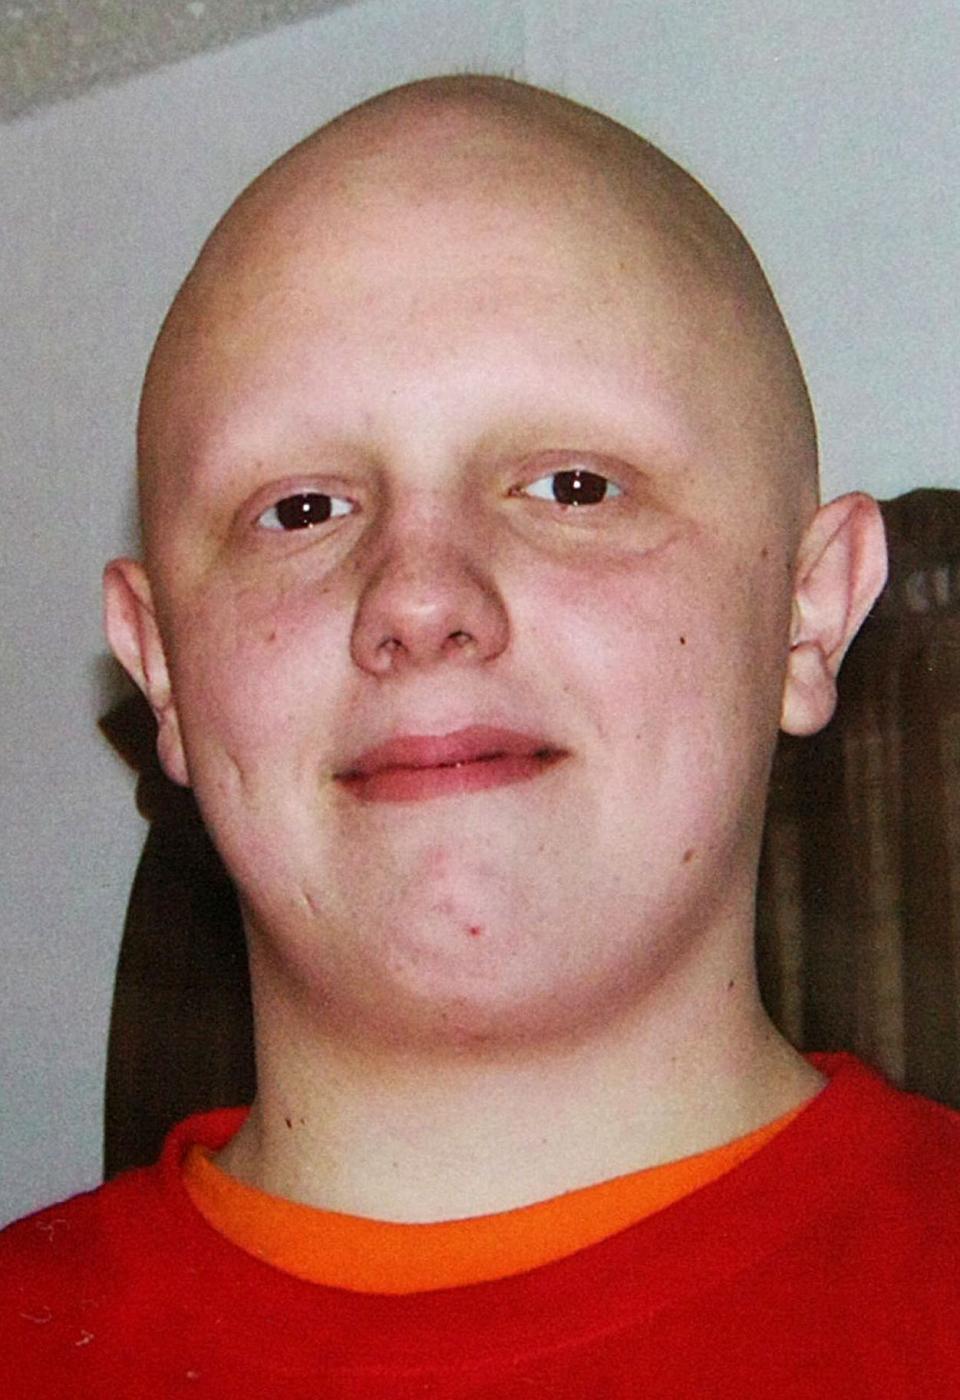 This Dec. 2007 family picture shows 15-year-old shooting victim Ryan McDonald. McDonald was fatally shot by another student at Central High School in Knoxville on Aug. 21, 2008.